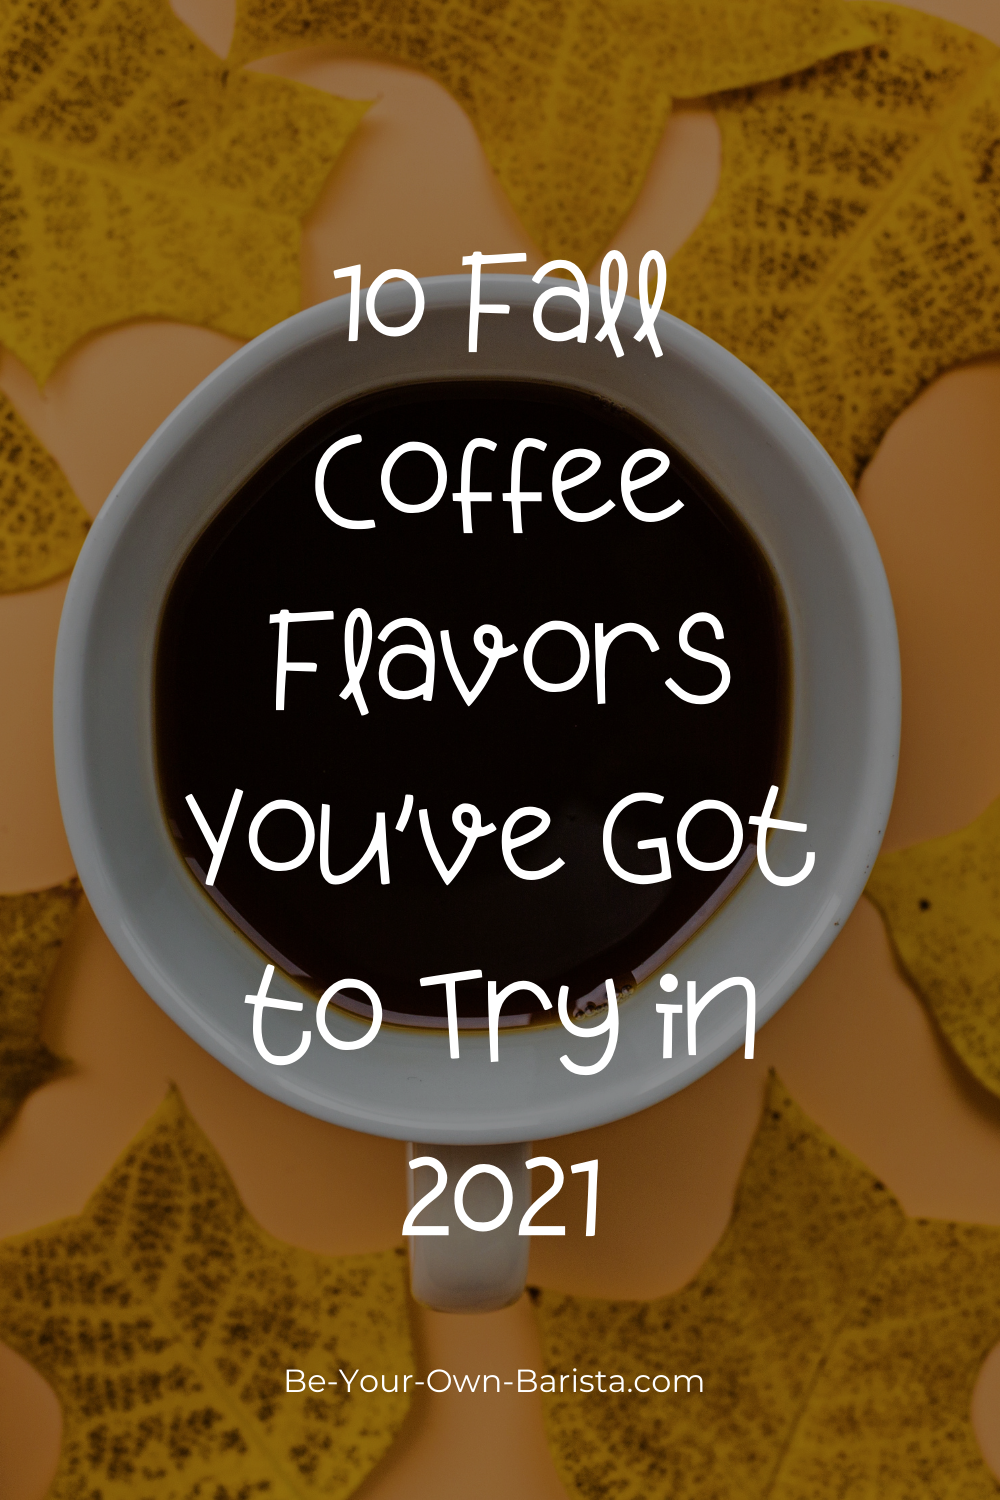 From toasted marshmallow s’mores to caramel apple and cinnamon roll to classic pumpkin spice, here are ten fall coffee flavors you’ve got to try in 2021.